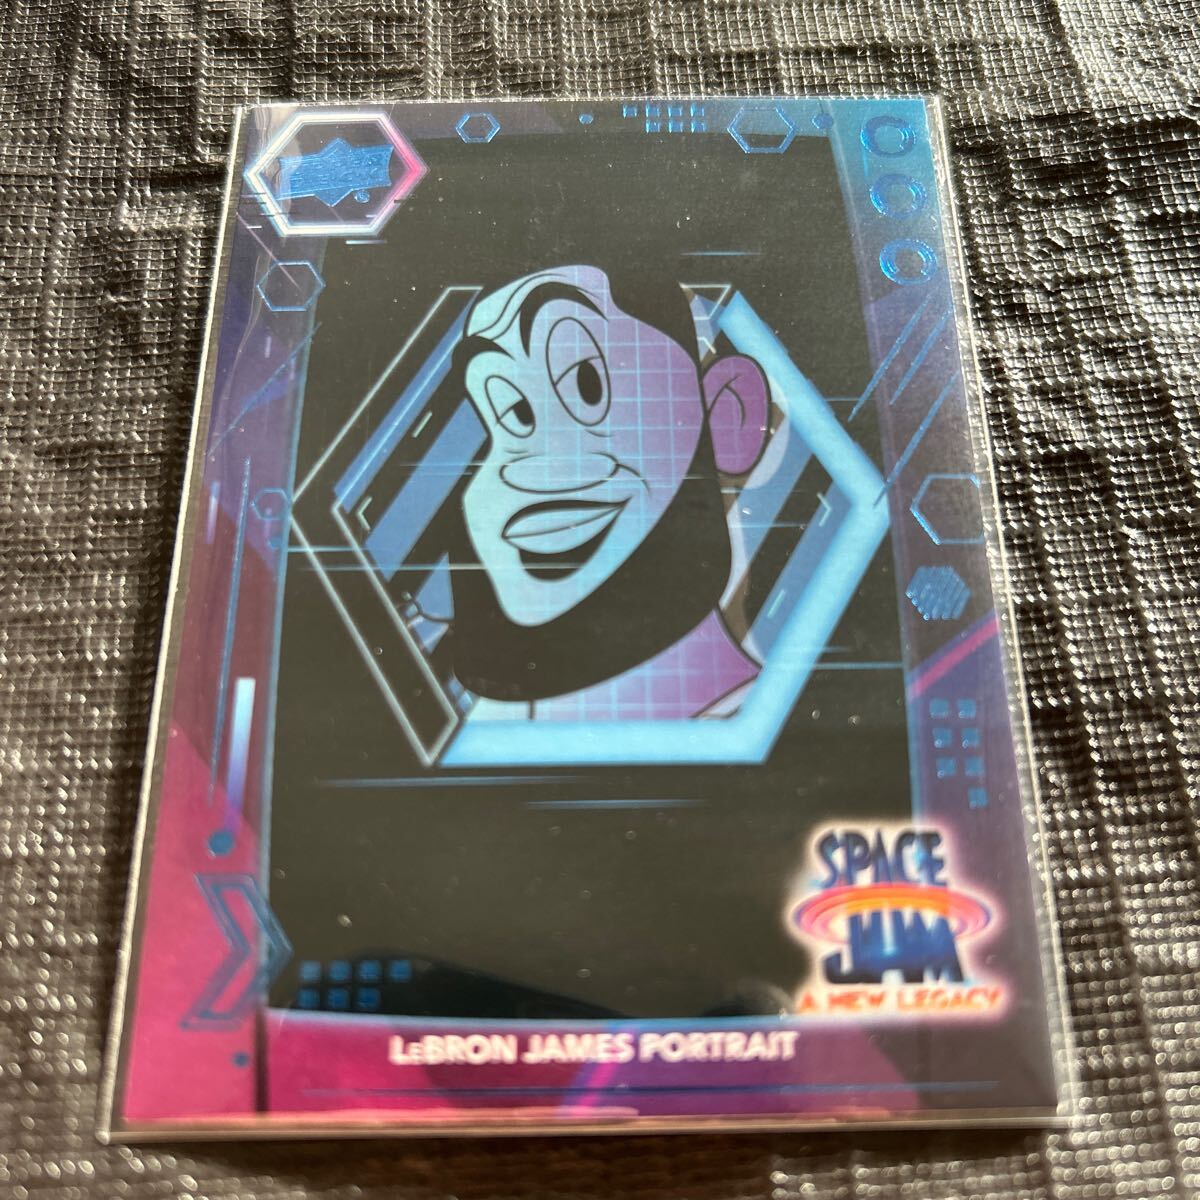 2021 UpperDeck Space Jam A New Legacy Lebron James 他10カード　レブロンジェームス　レイカーズ_画像2